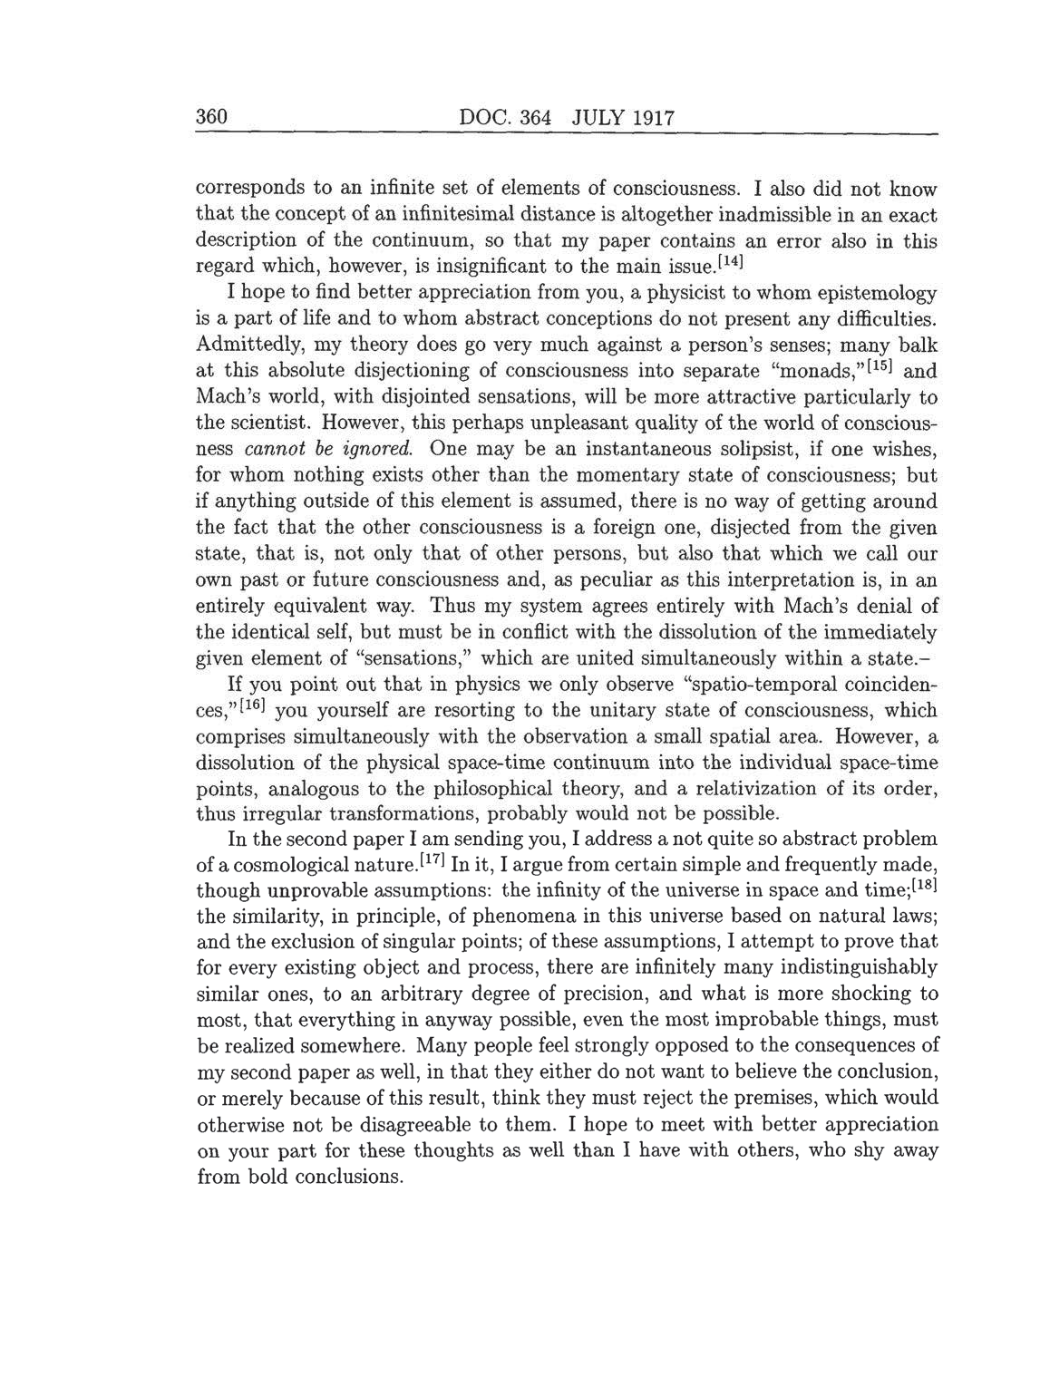 Volume 8: The Berlin Years: Correspondence, 1914-1918 (English translation supplement) page 360